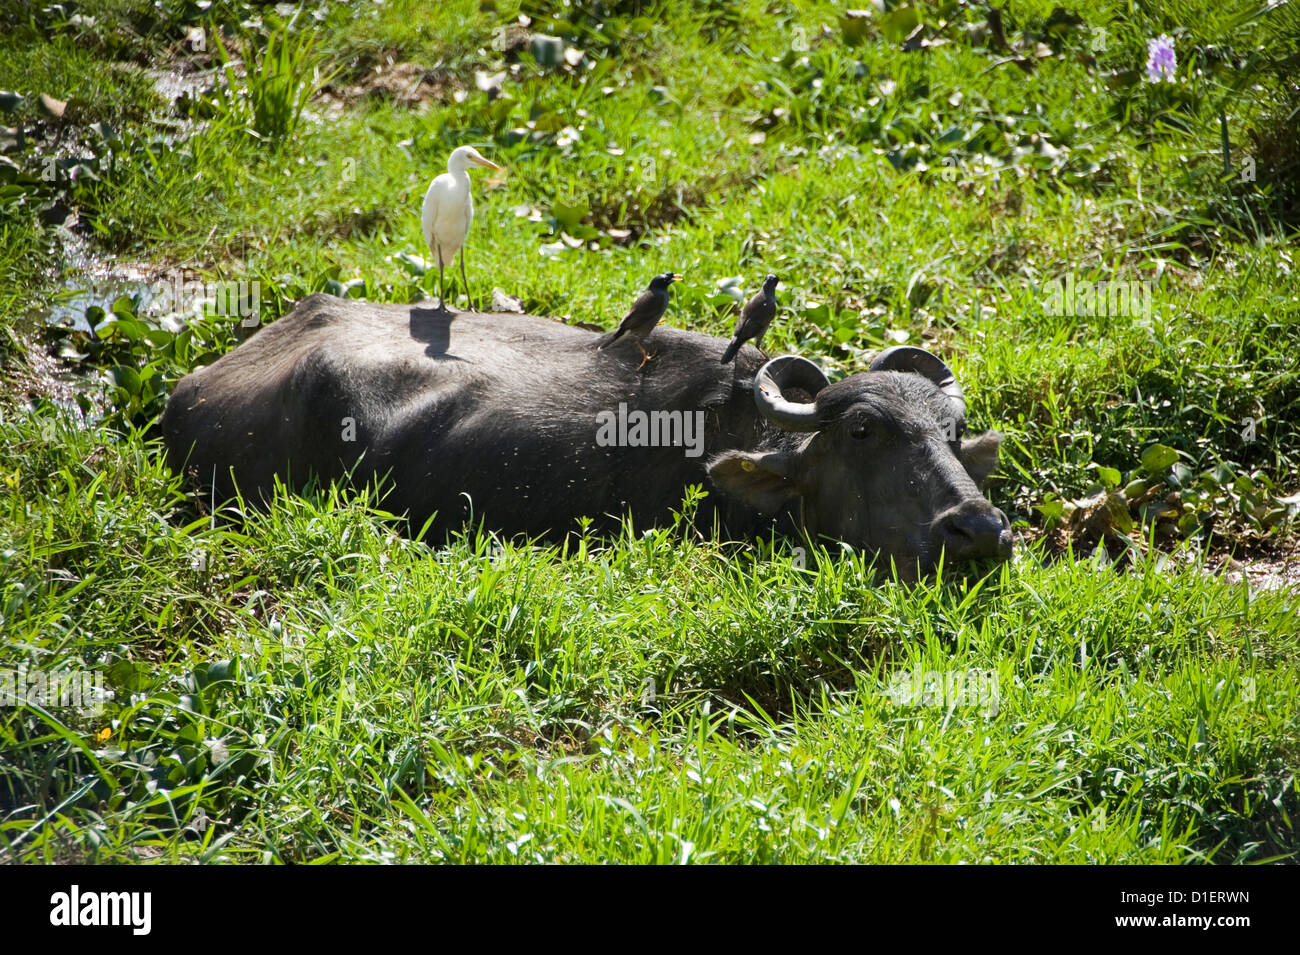 Horizontal close up of a water buffalo with mynah birds and an egret sitting on its back wading through water in Kerala. Stock Photo